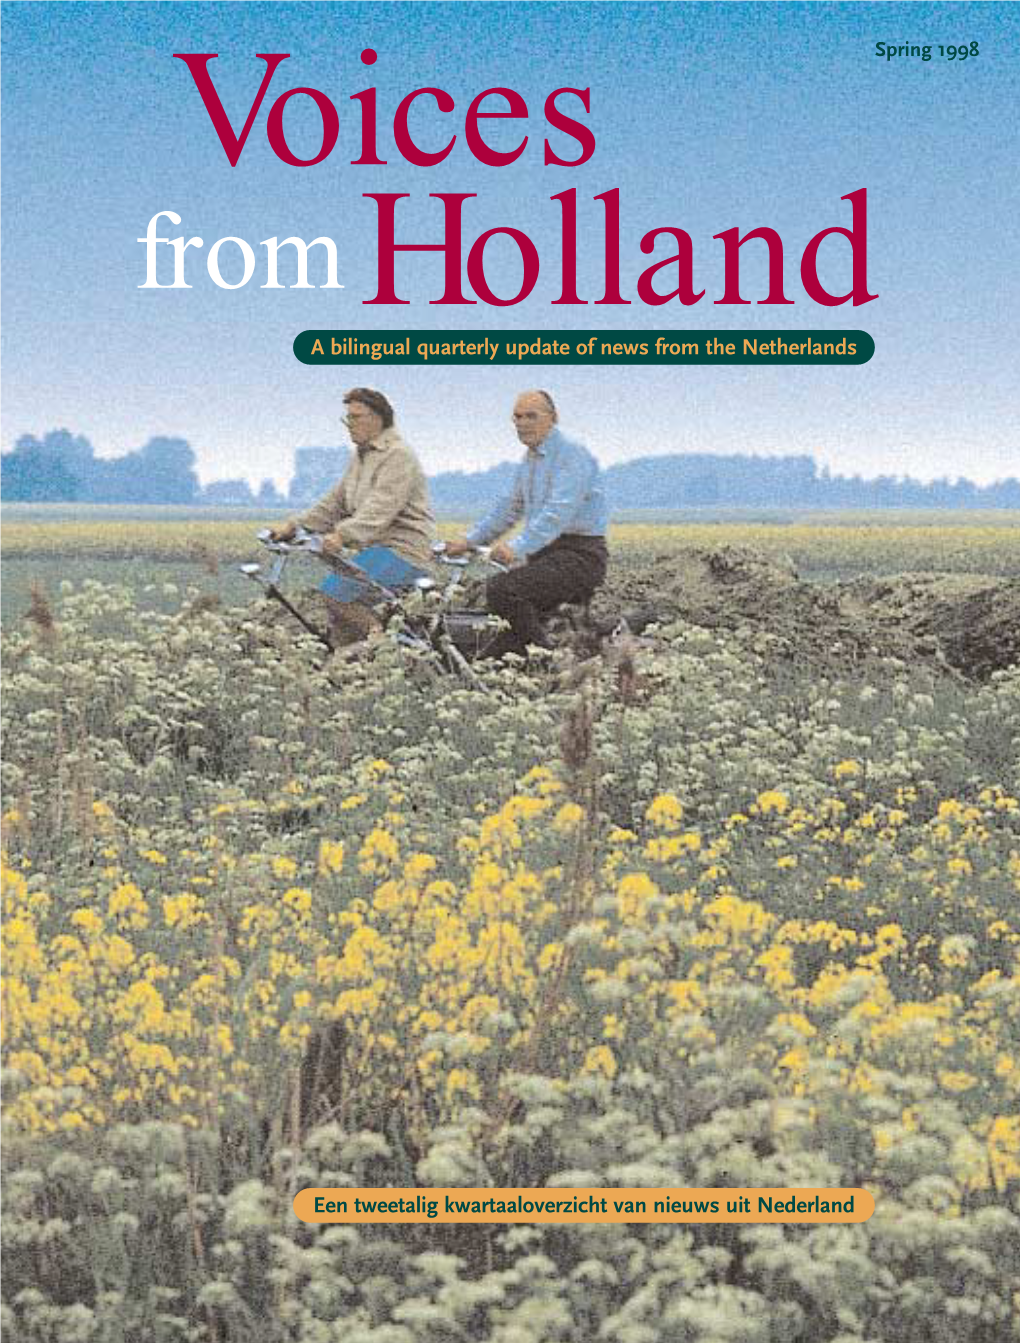 Voices Spring 1998 from Holland a Bilingual Quarterly Update of News from the Netherlands